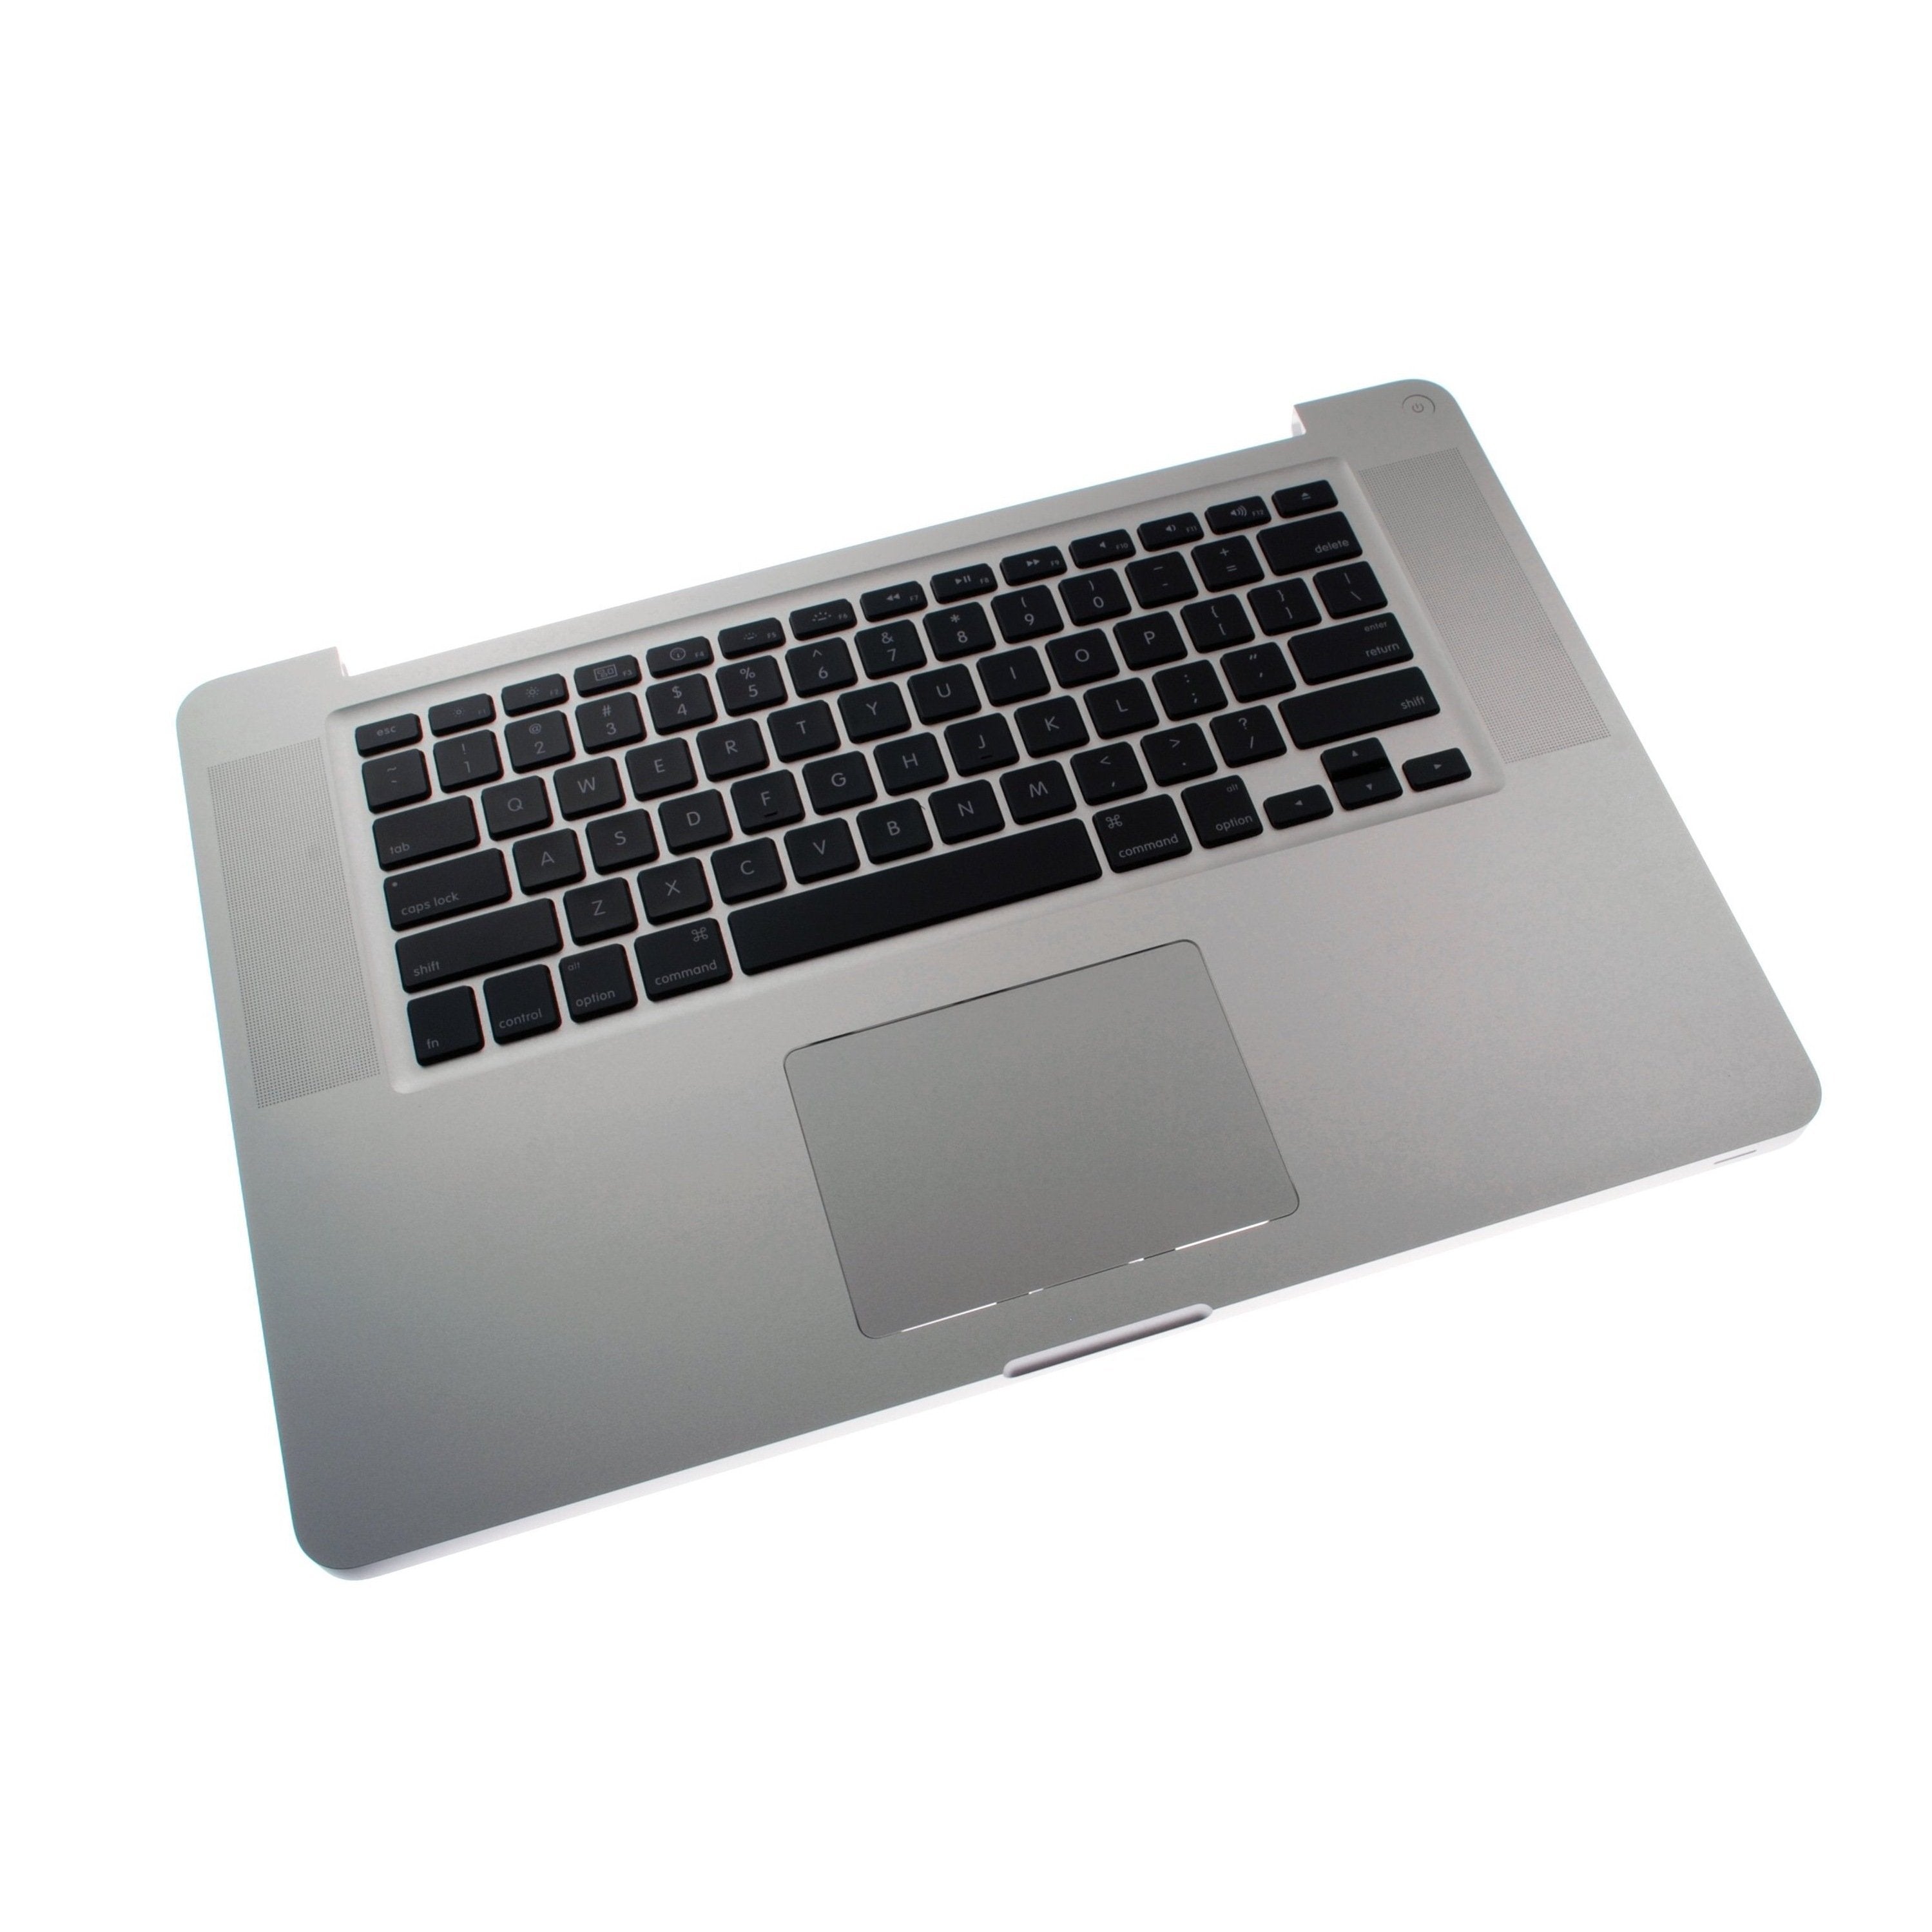 MacBook Pro 15" Unibody (Early 2011-Mid 2012) Upper Case New With Trackpad